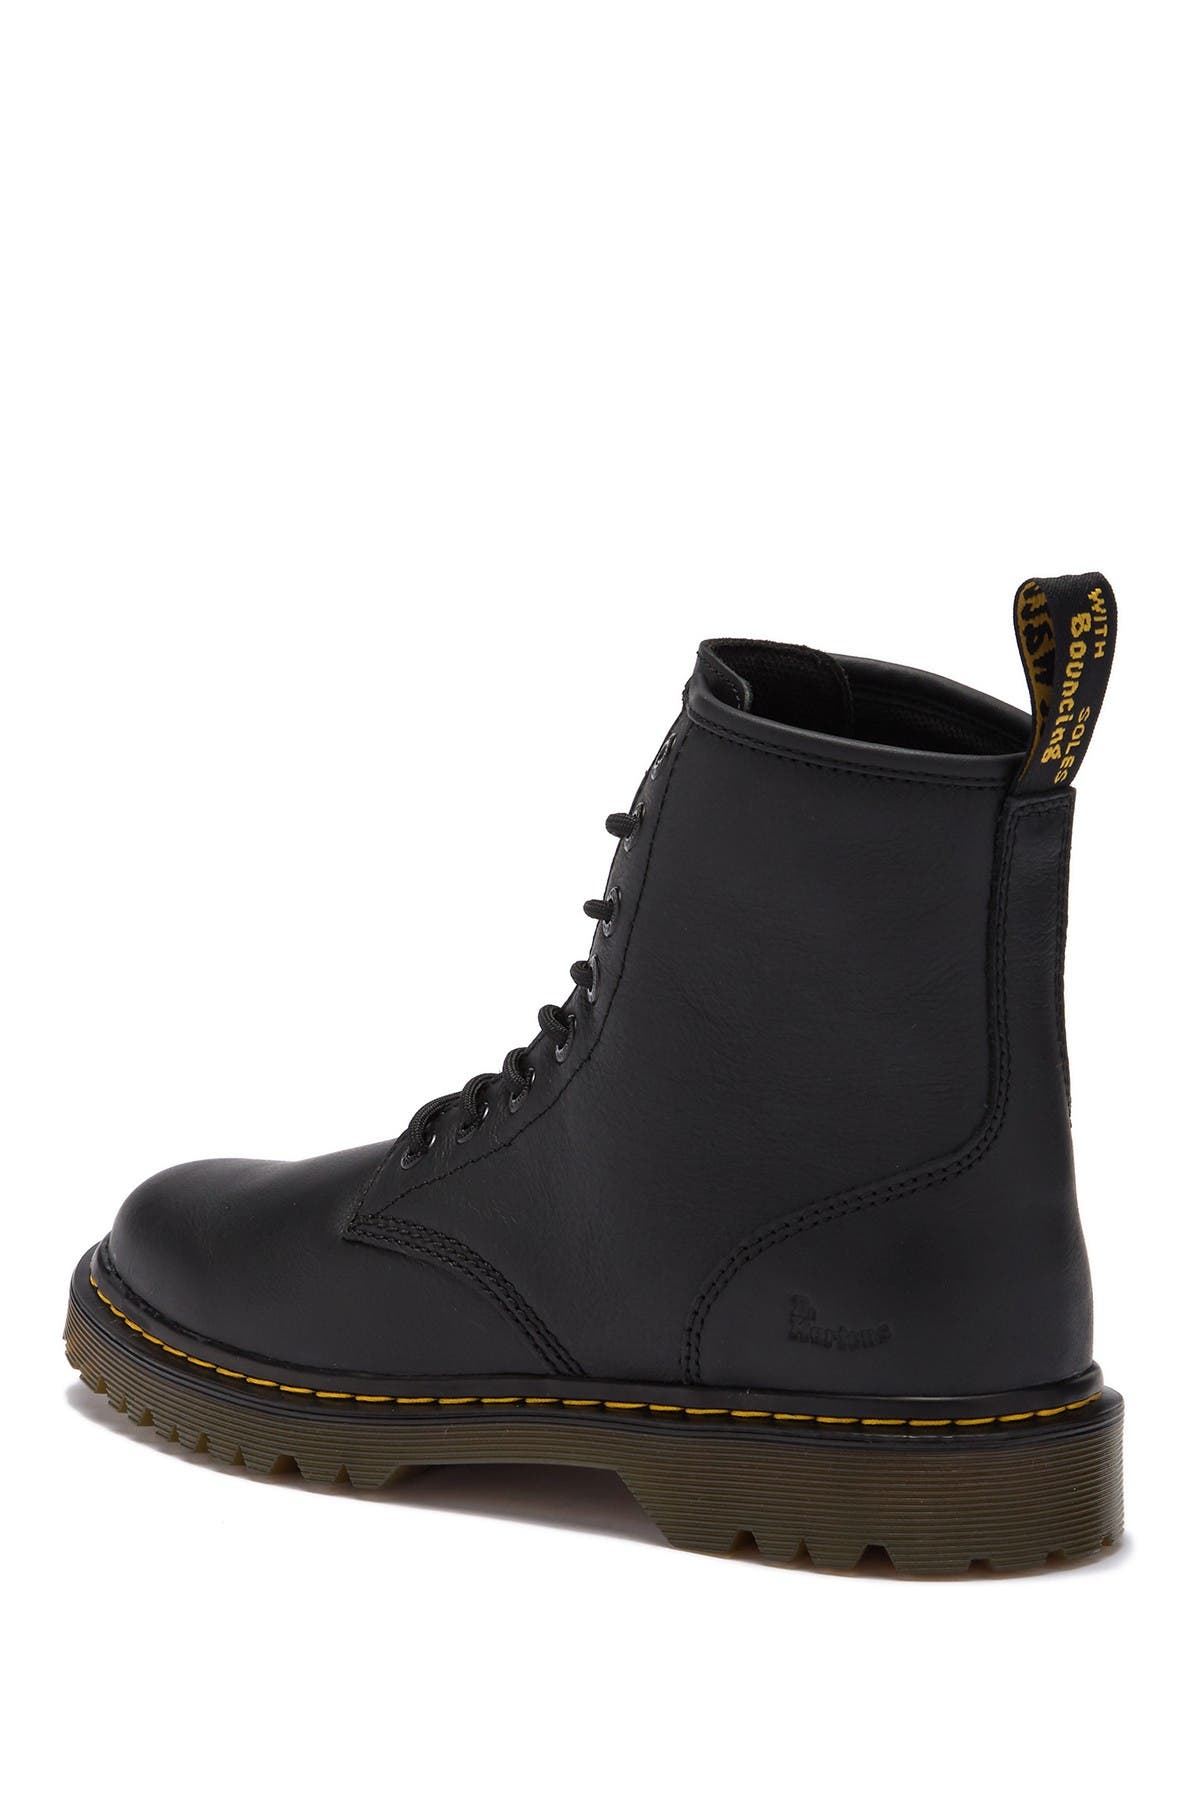 doc martens removable insole